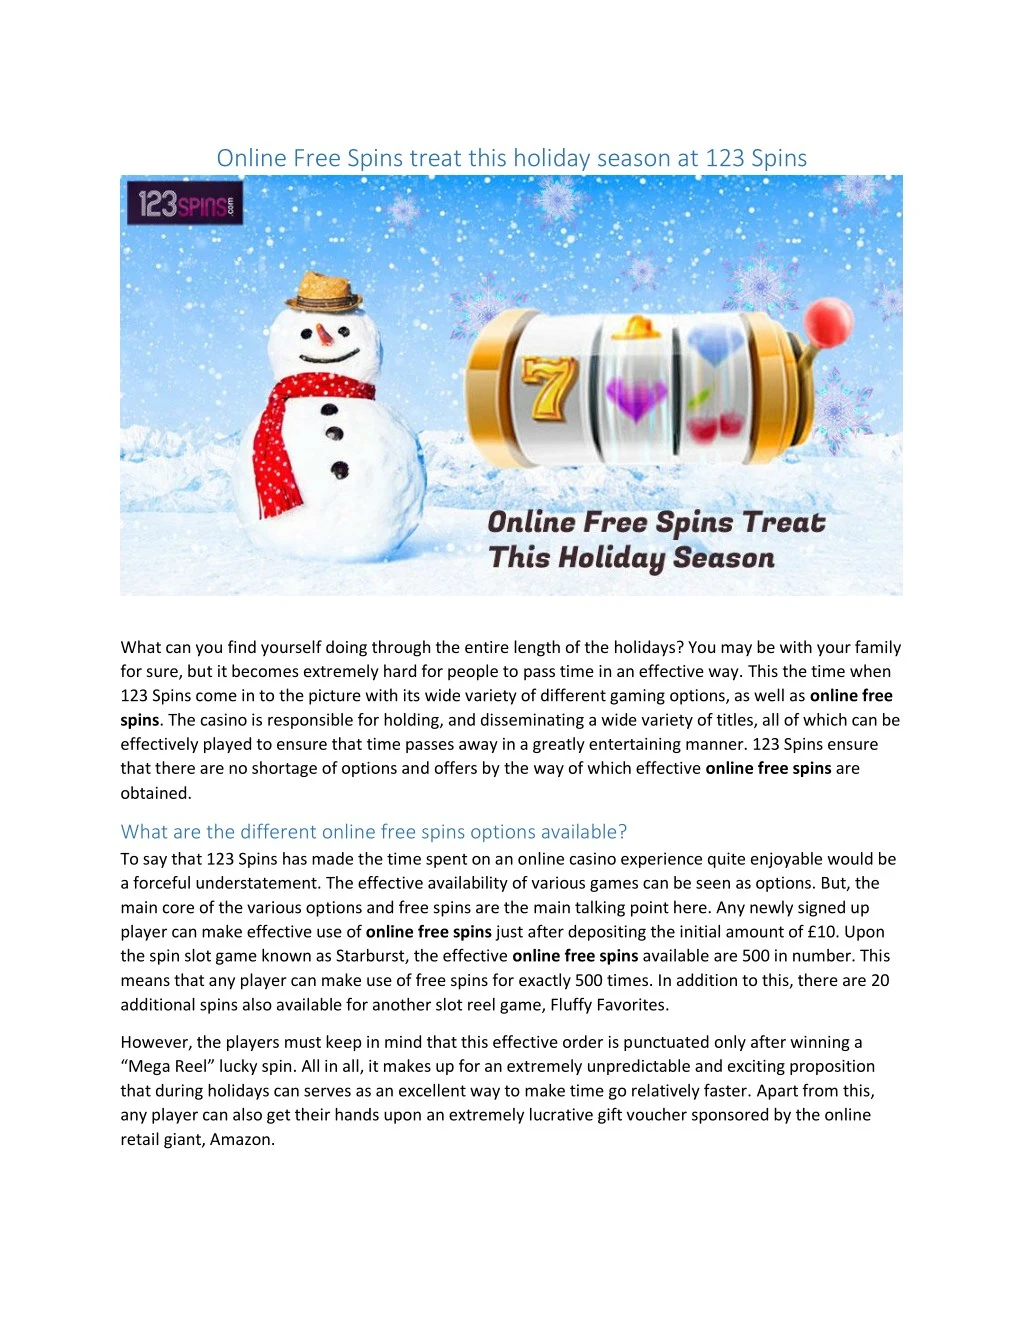 online free spins treat this holiday season